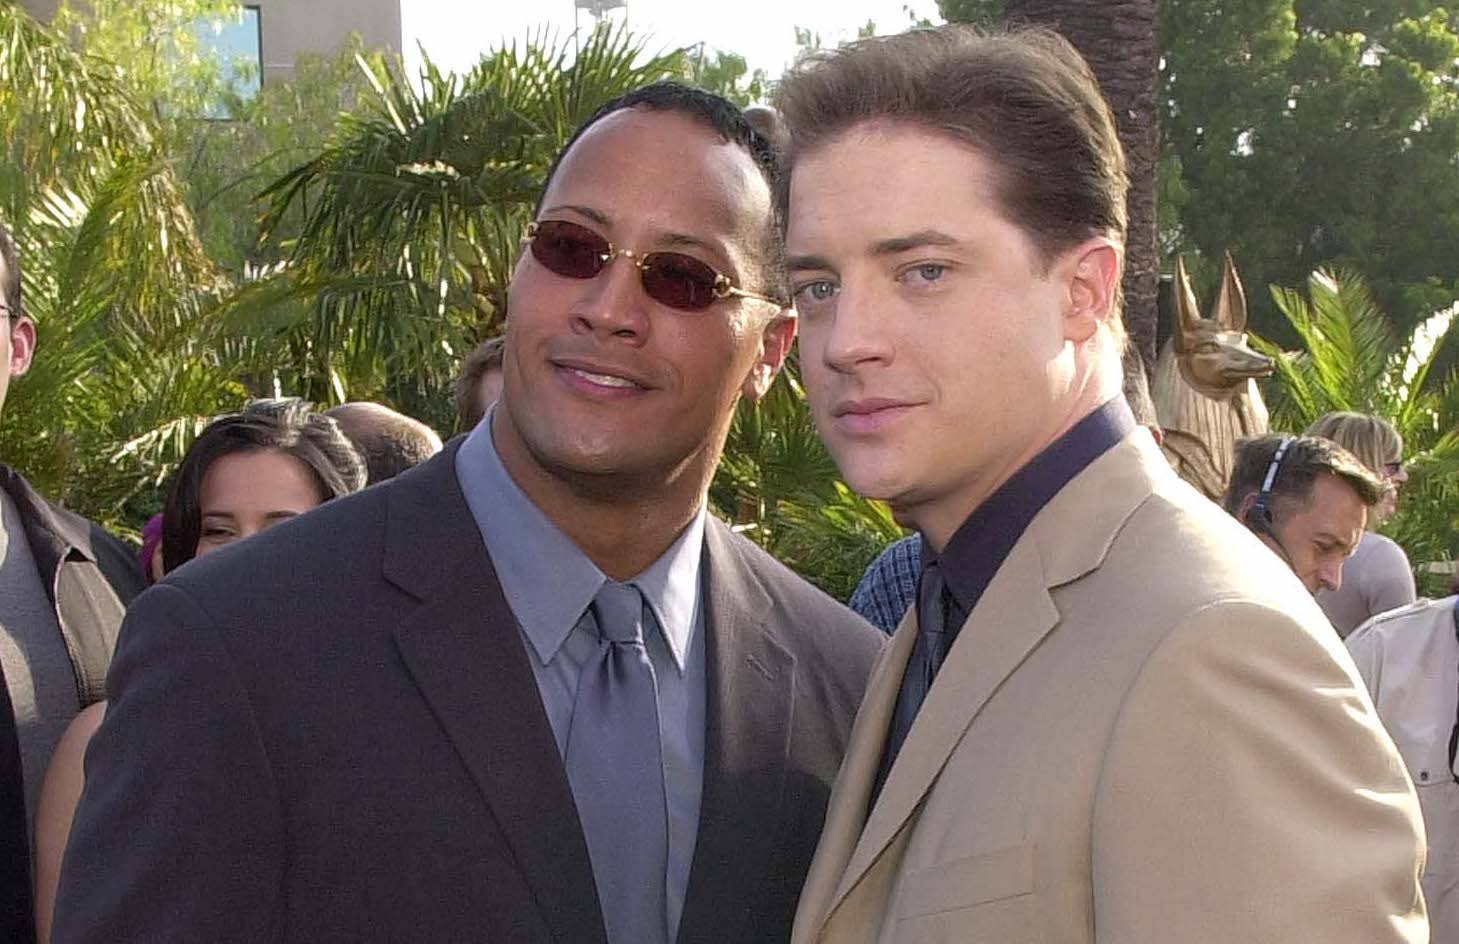 The Rock and Brendan Fraser together, the dynamic duo